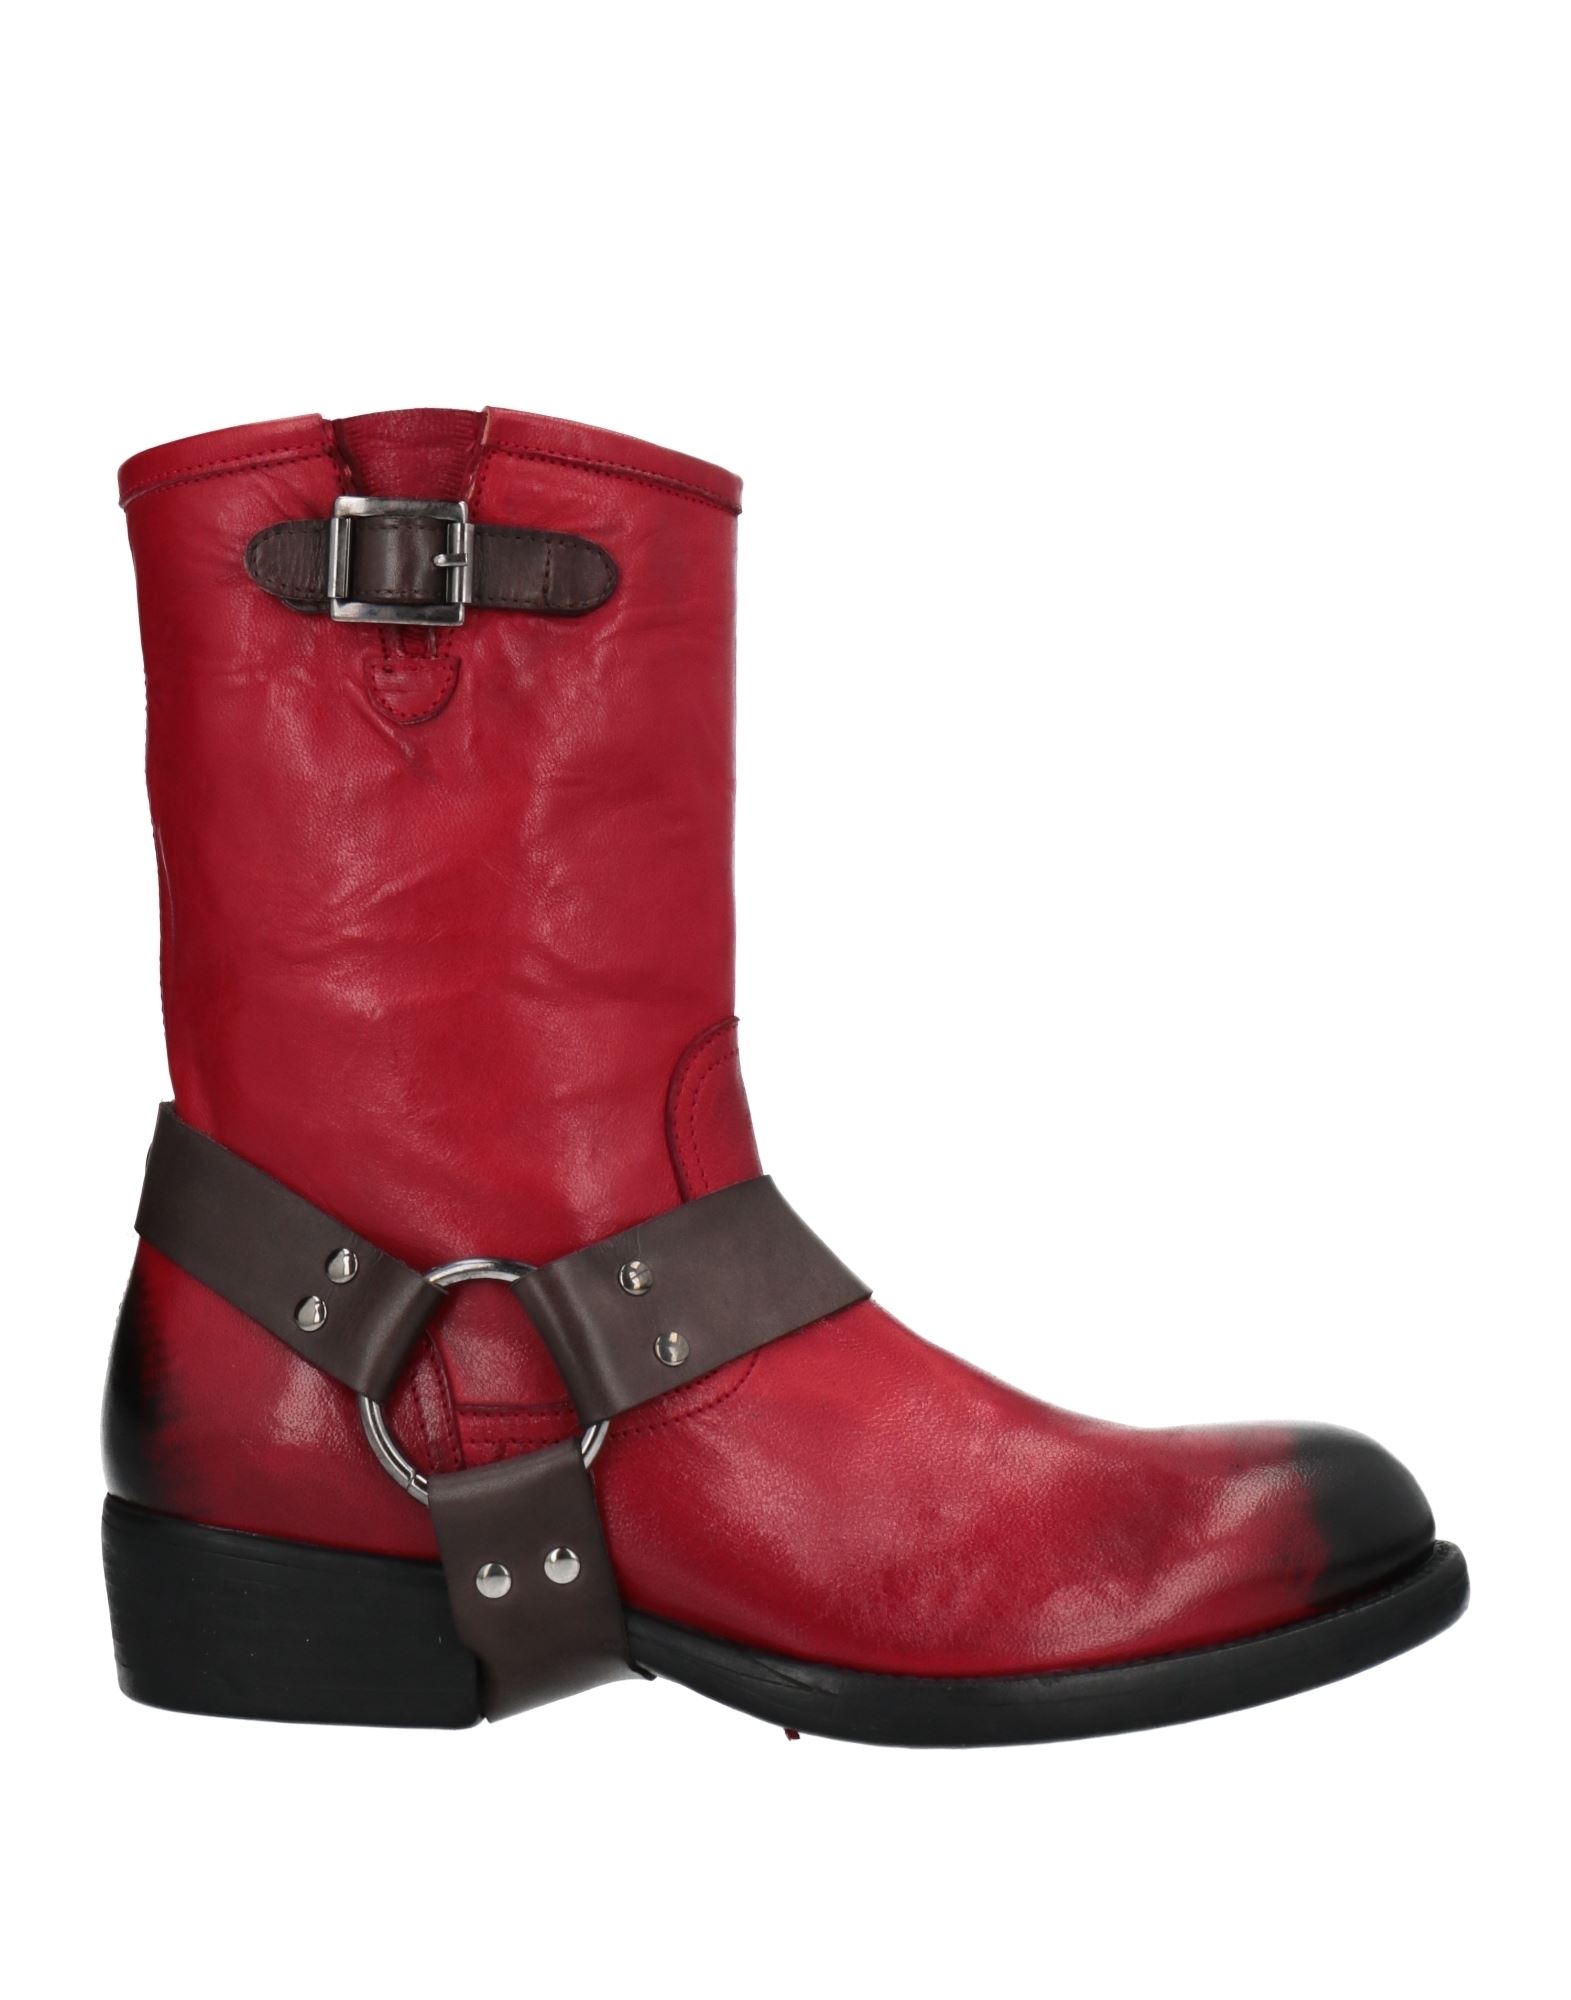 Jp/david Ankle Boots In Red